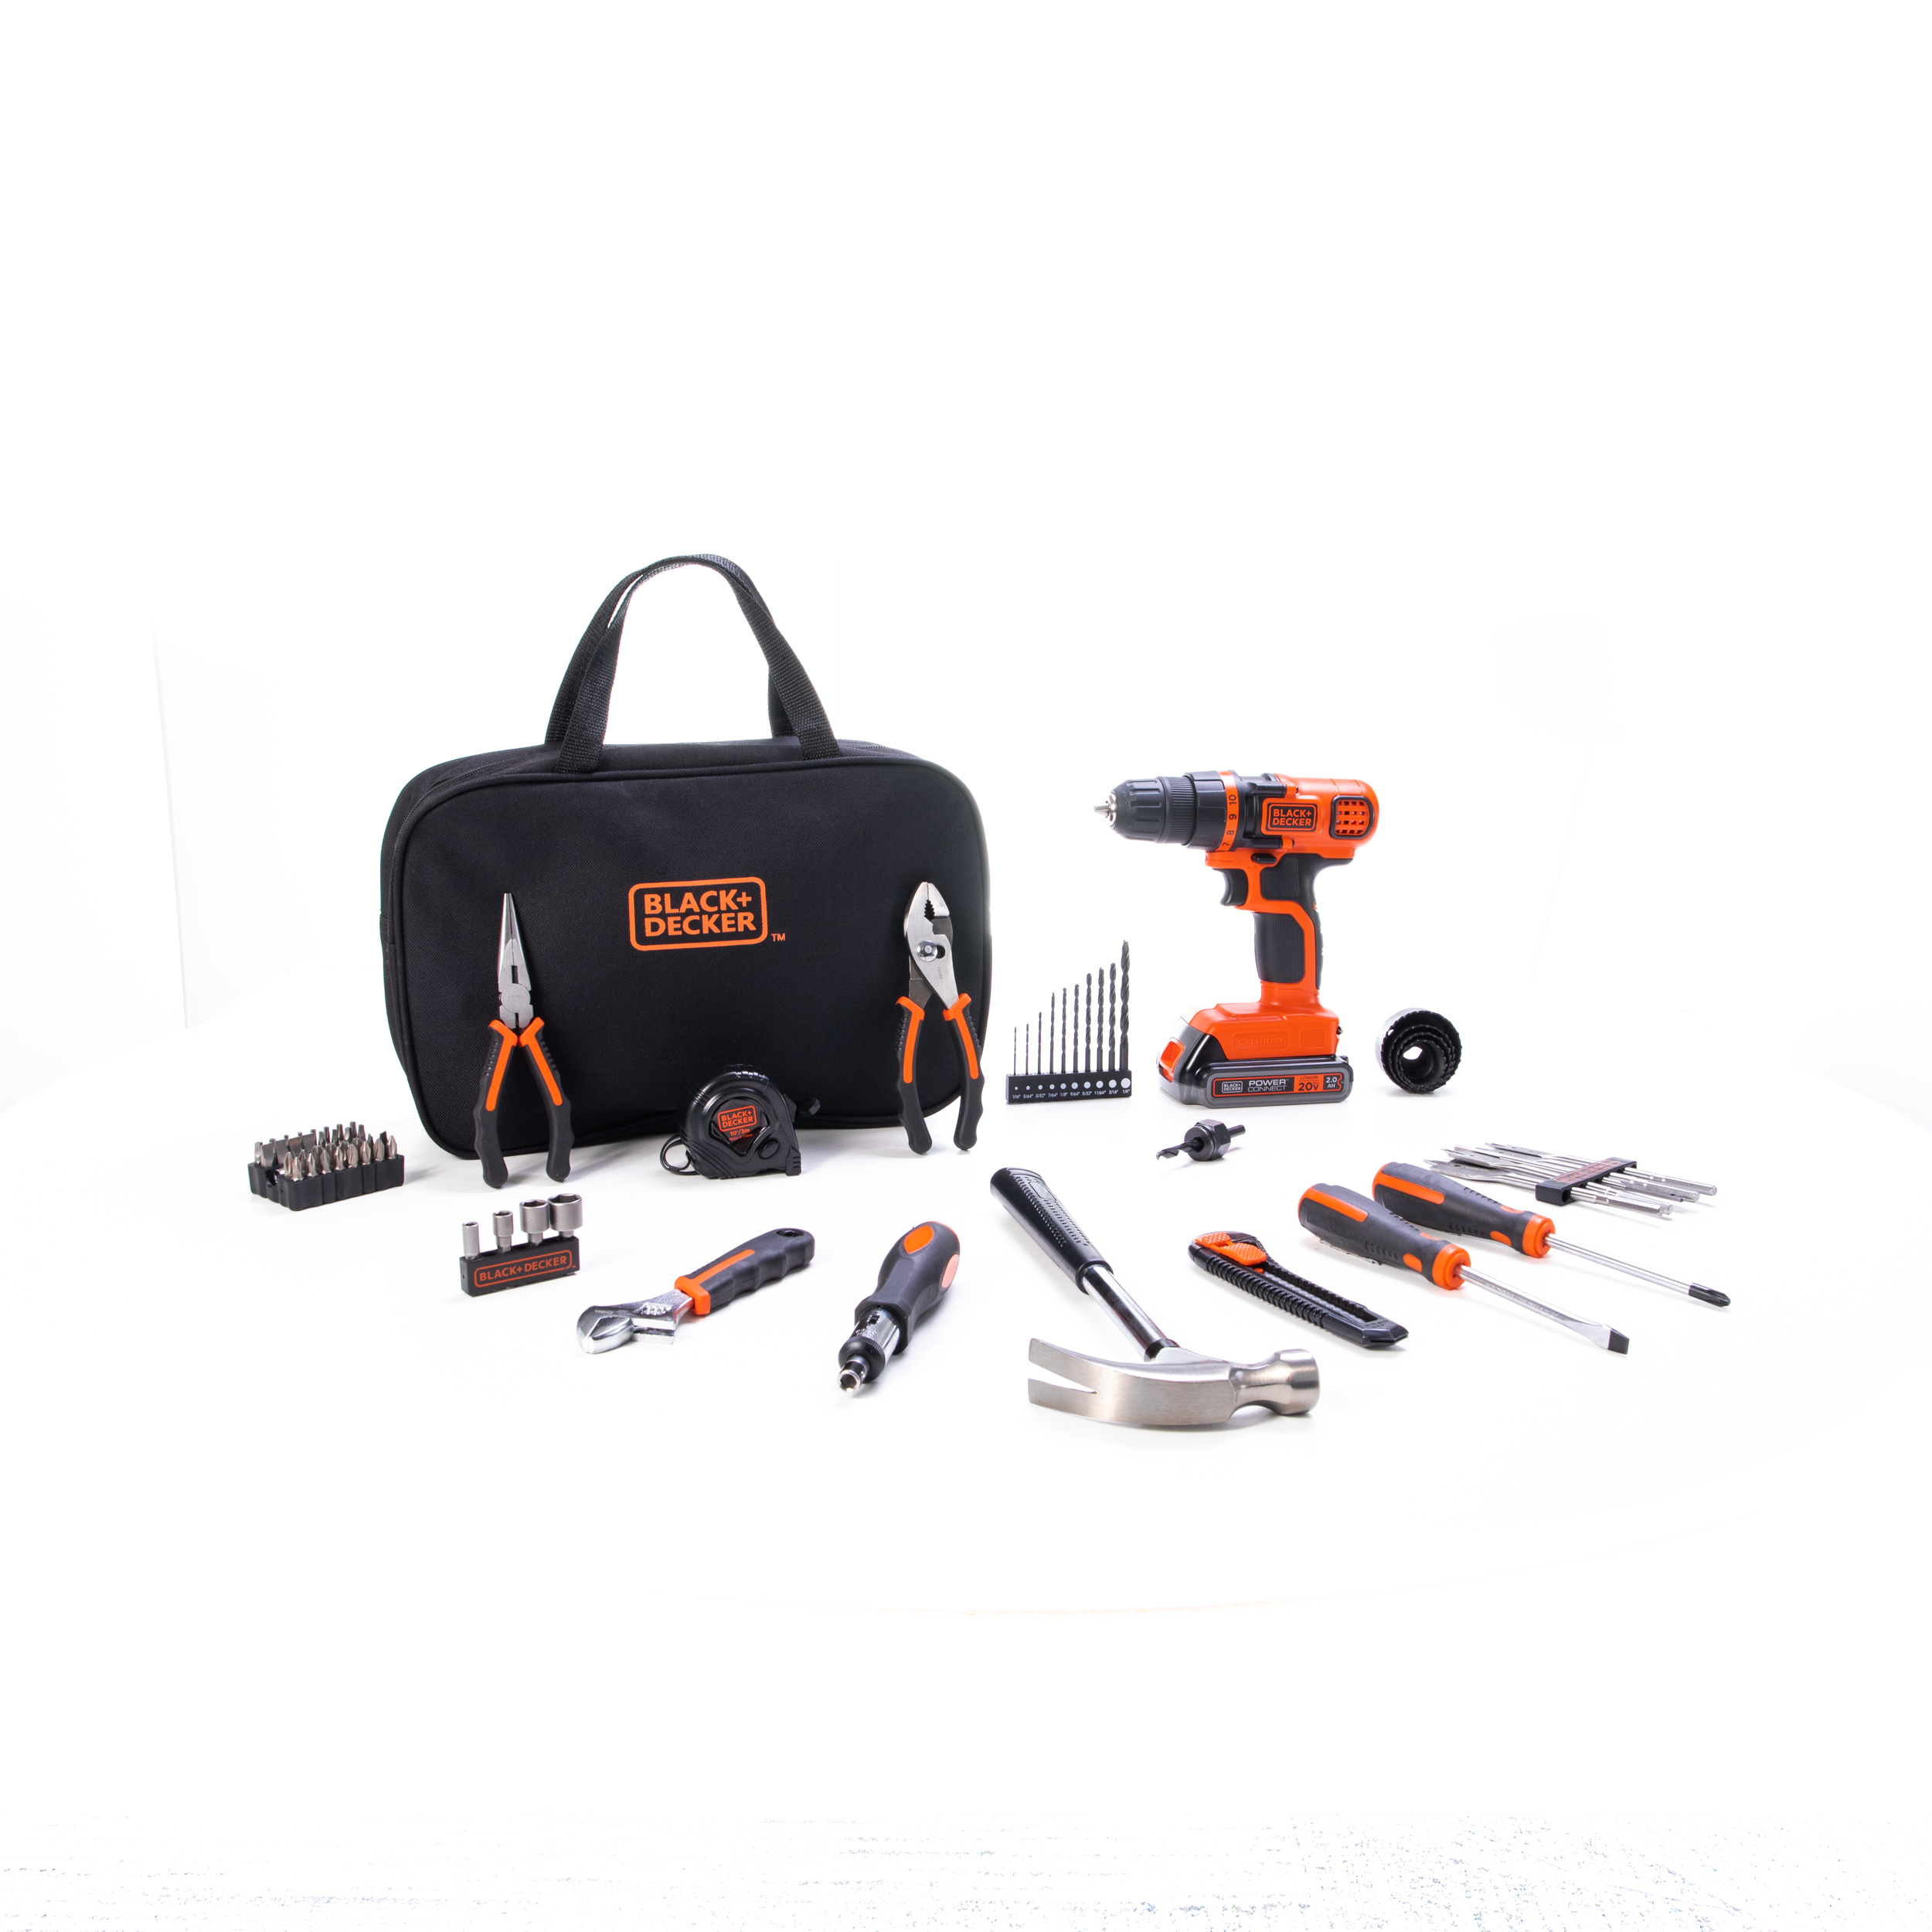 Black Decker 20V MAX Lithium DrillDriver 68 Piece Project Kit With